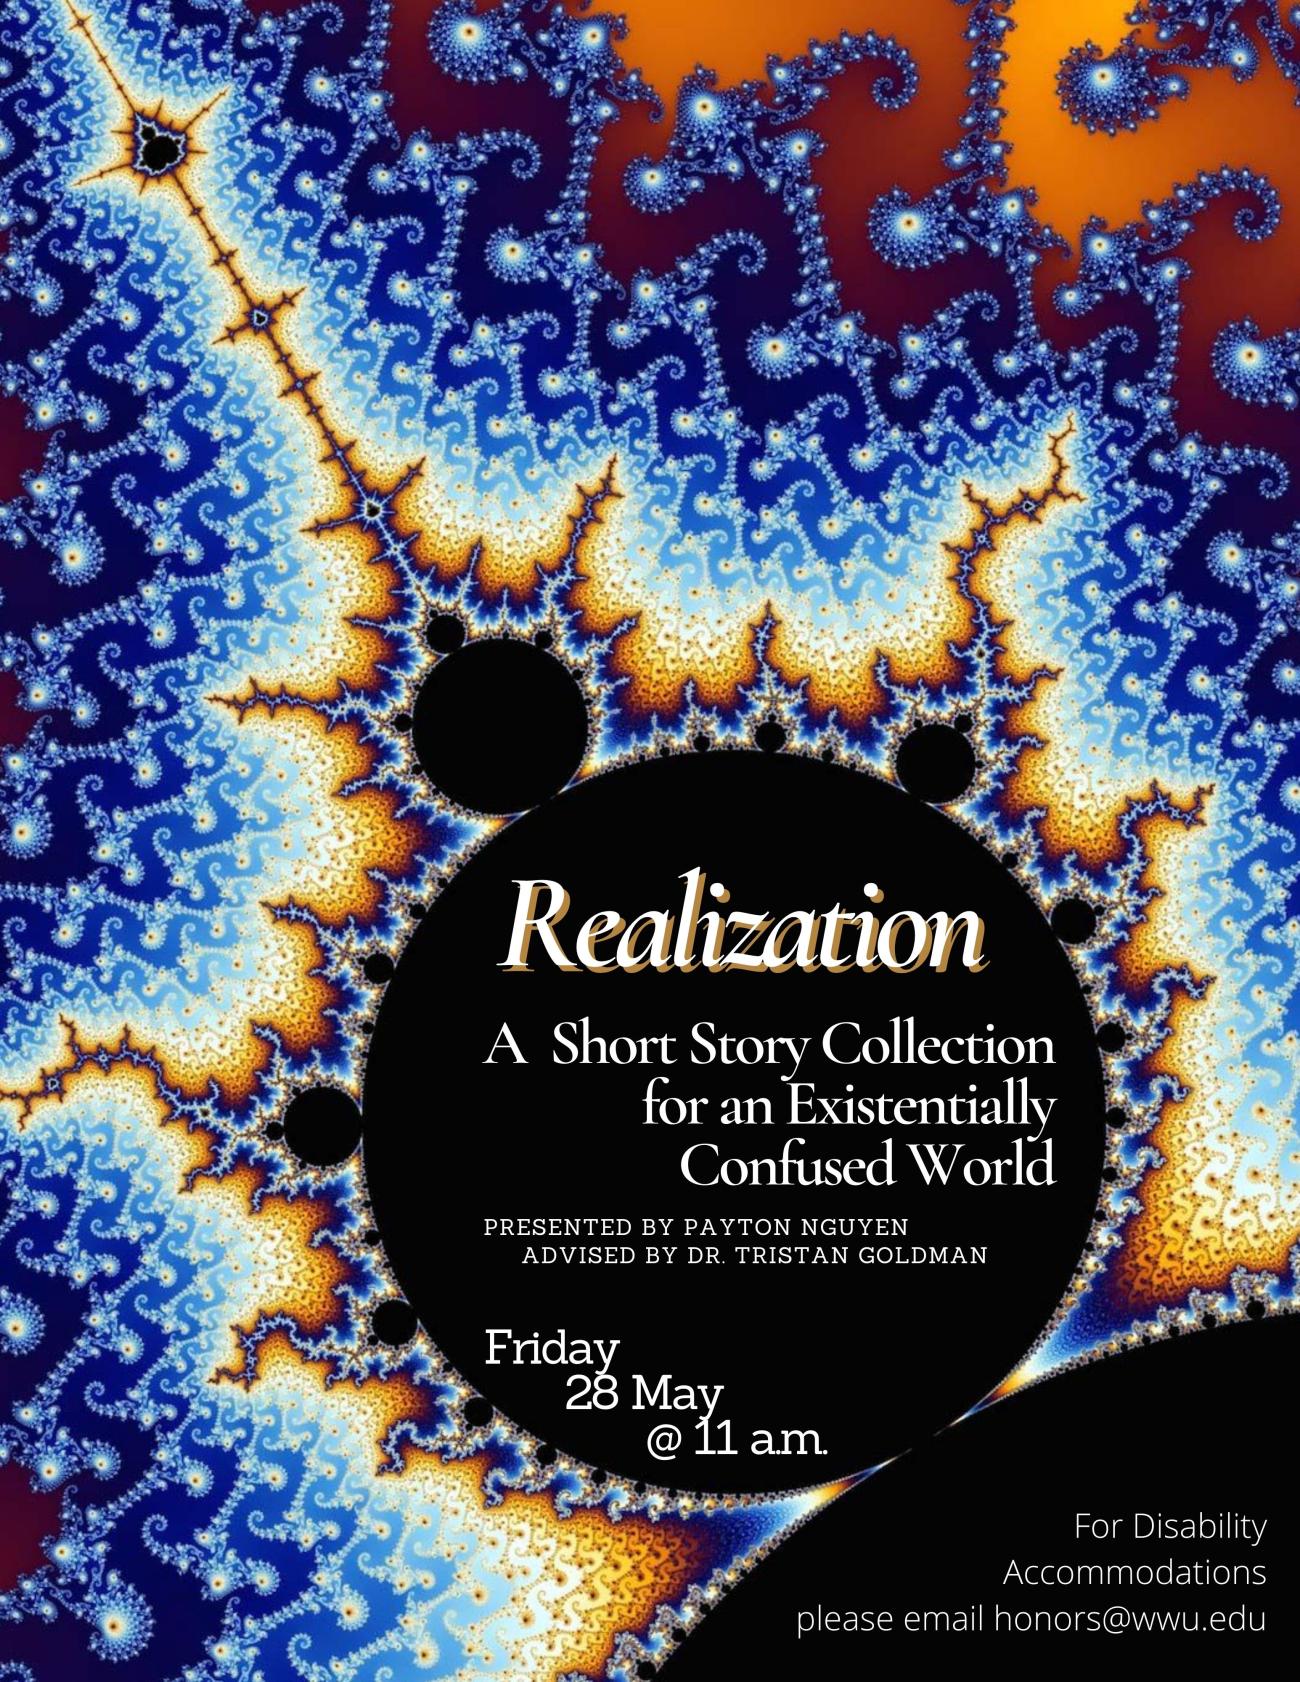 A zoomed-in image of the Mandelbrot fractal, a spiraling, seahorse-like pattern glowing in shades of blue and orange. In the bottom half of the poster is the Mandelbrot’s defining circular black hole, from which the seahorse pattern comes. Within the black hole reads: “Realization: A Short Story Collection for an Existentially Confused World. Presented by Payton Nguyen. Advised by Tristan Goldman. Friday 28 May @ 11 a.m. For Disability Accommodations please email honors@wwu.edu.”